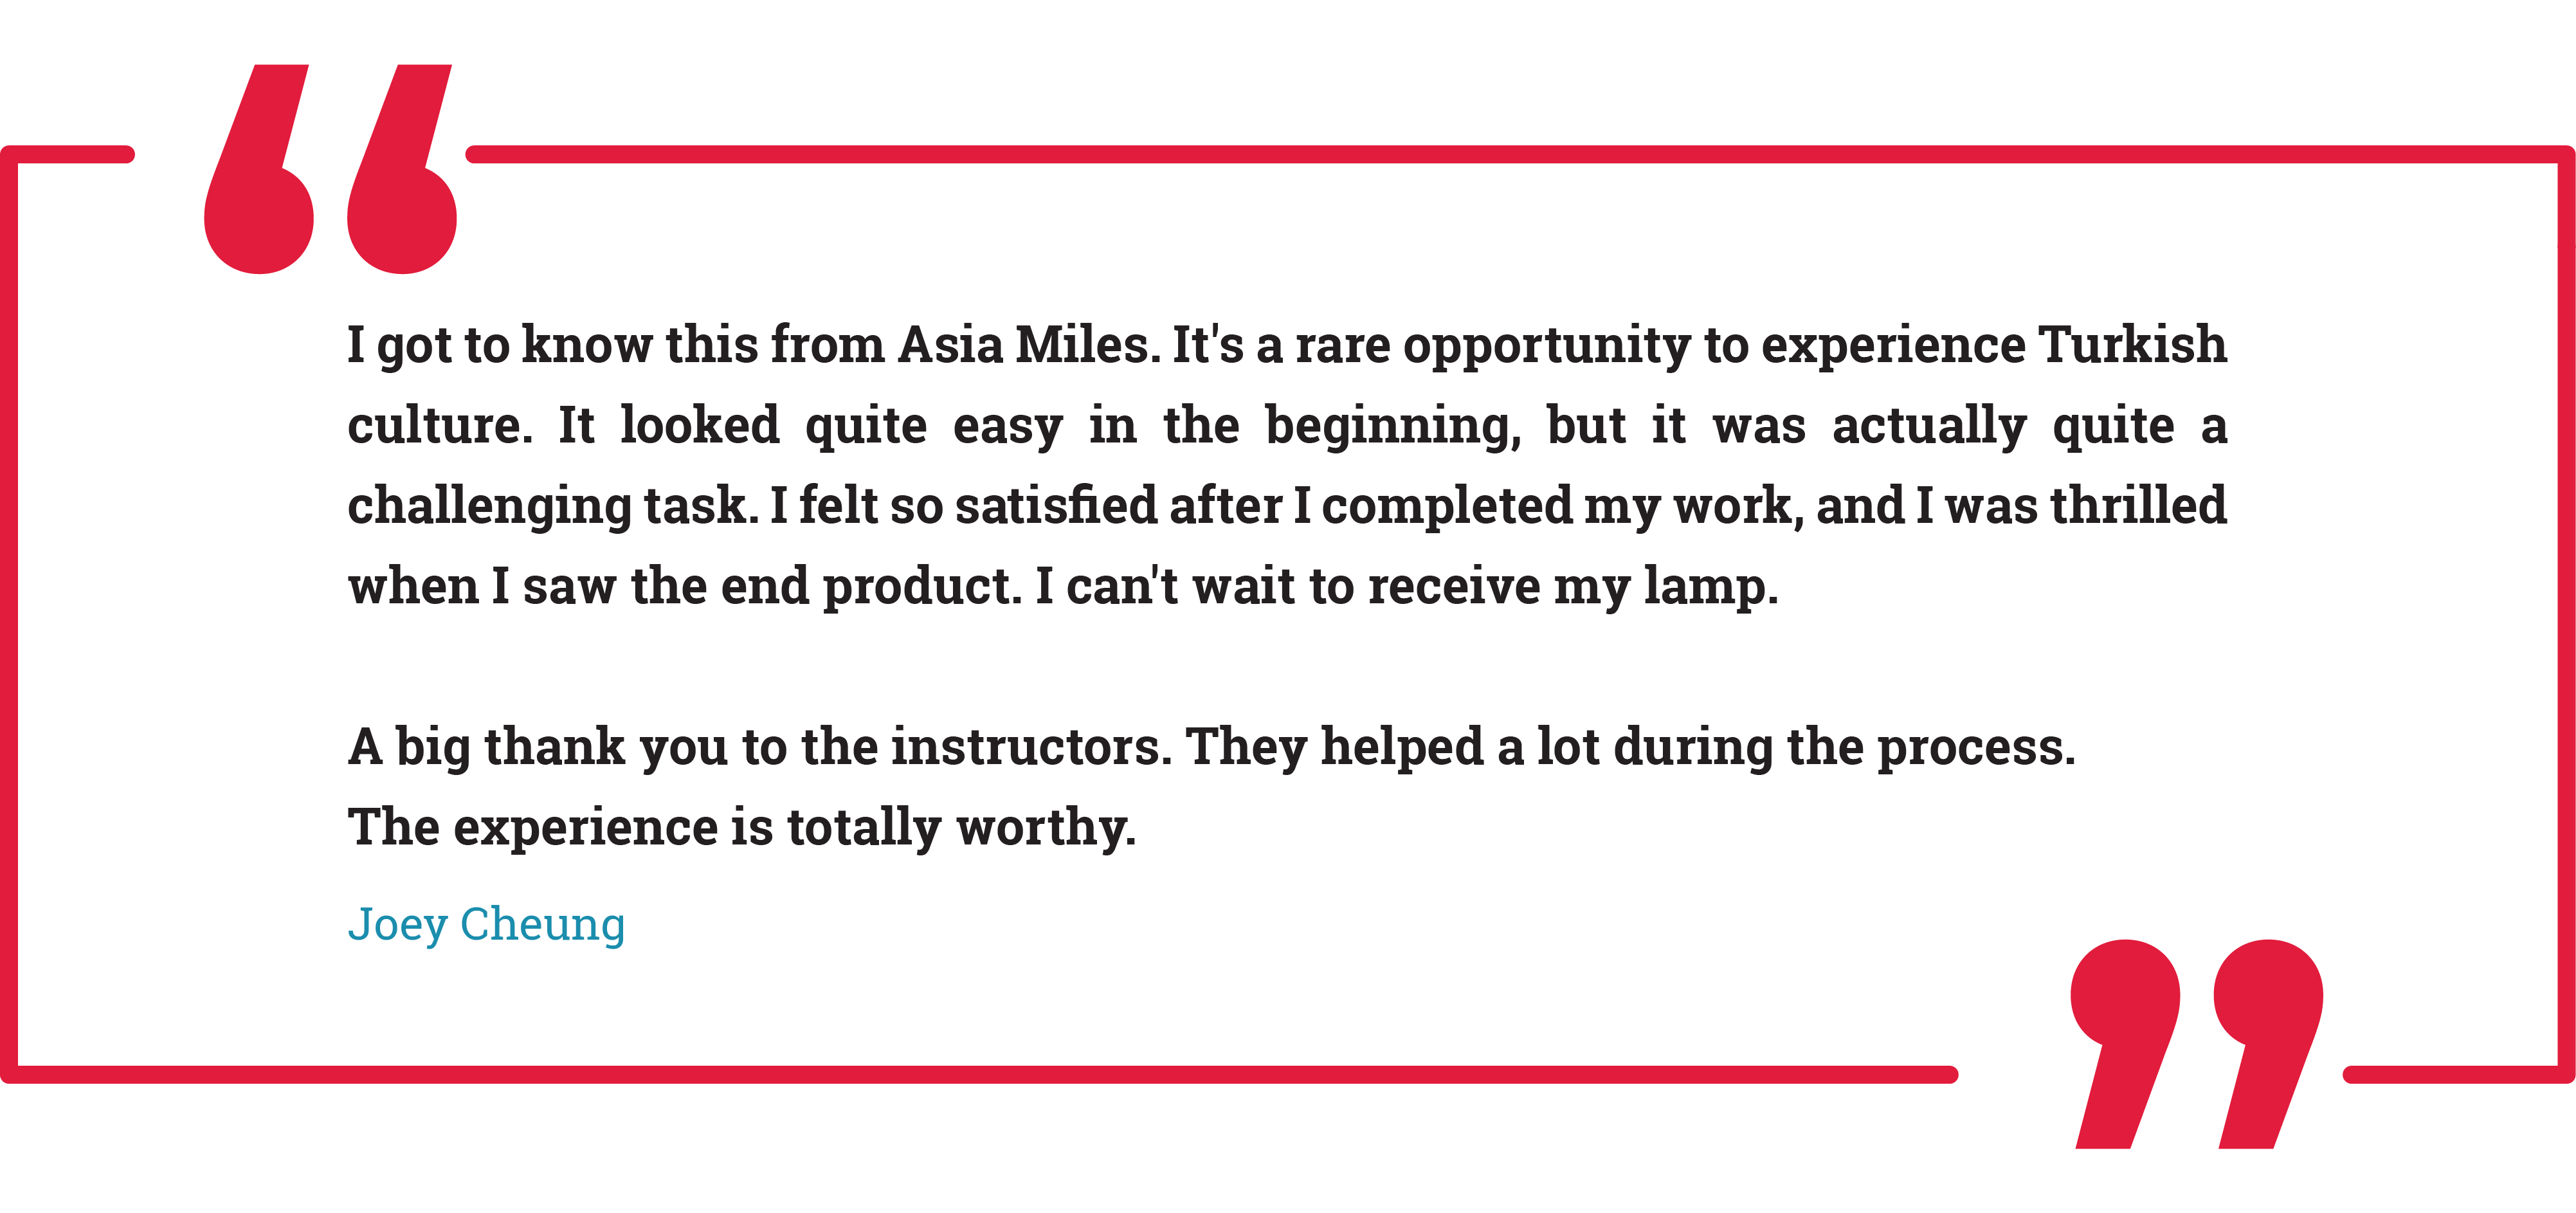 I got to know this from Asia Miles. It's a rare opportunity to experience Turkish culture. It looked quite easy in the beginning, but it was actually quite a challenging task. I felt so satisfied after I completed my work, and I was thrilled when I saw the end product. I can't wait to receive my lamp.
A big thank you to the instructors. They helped a lot during the process.
The experience is totally worthy.